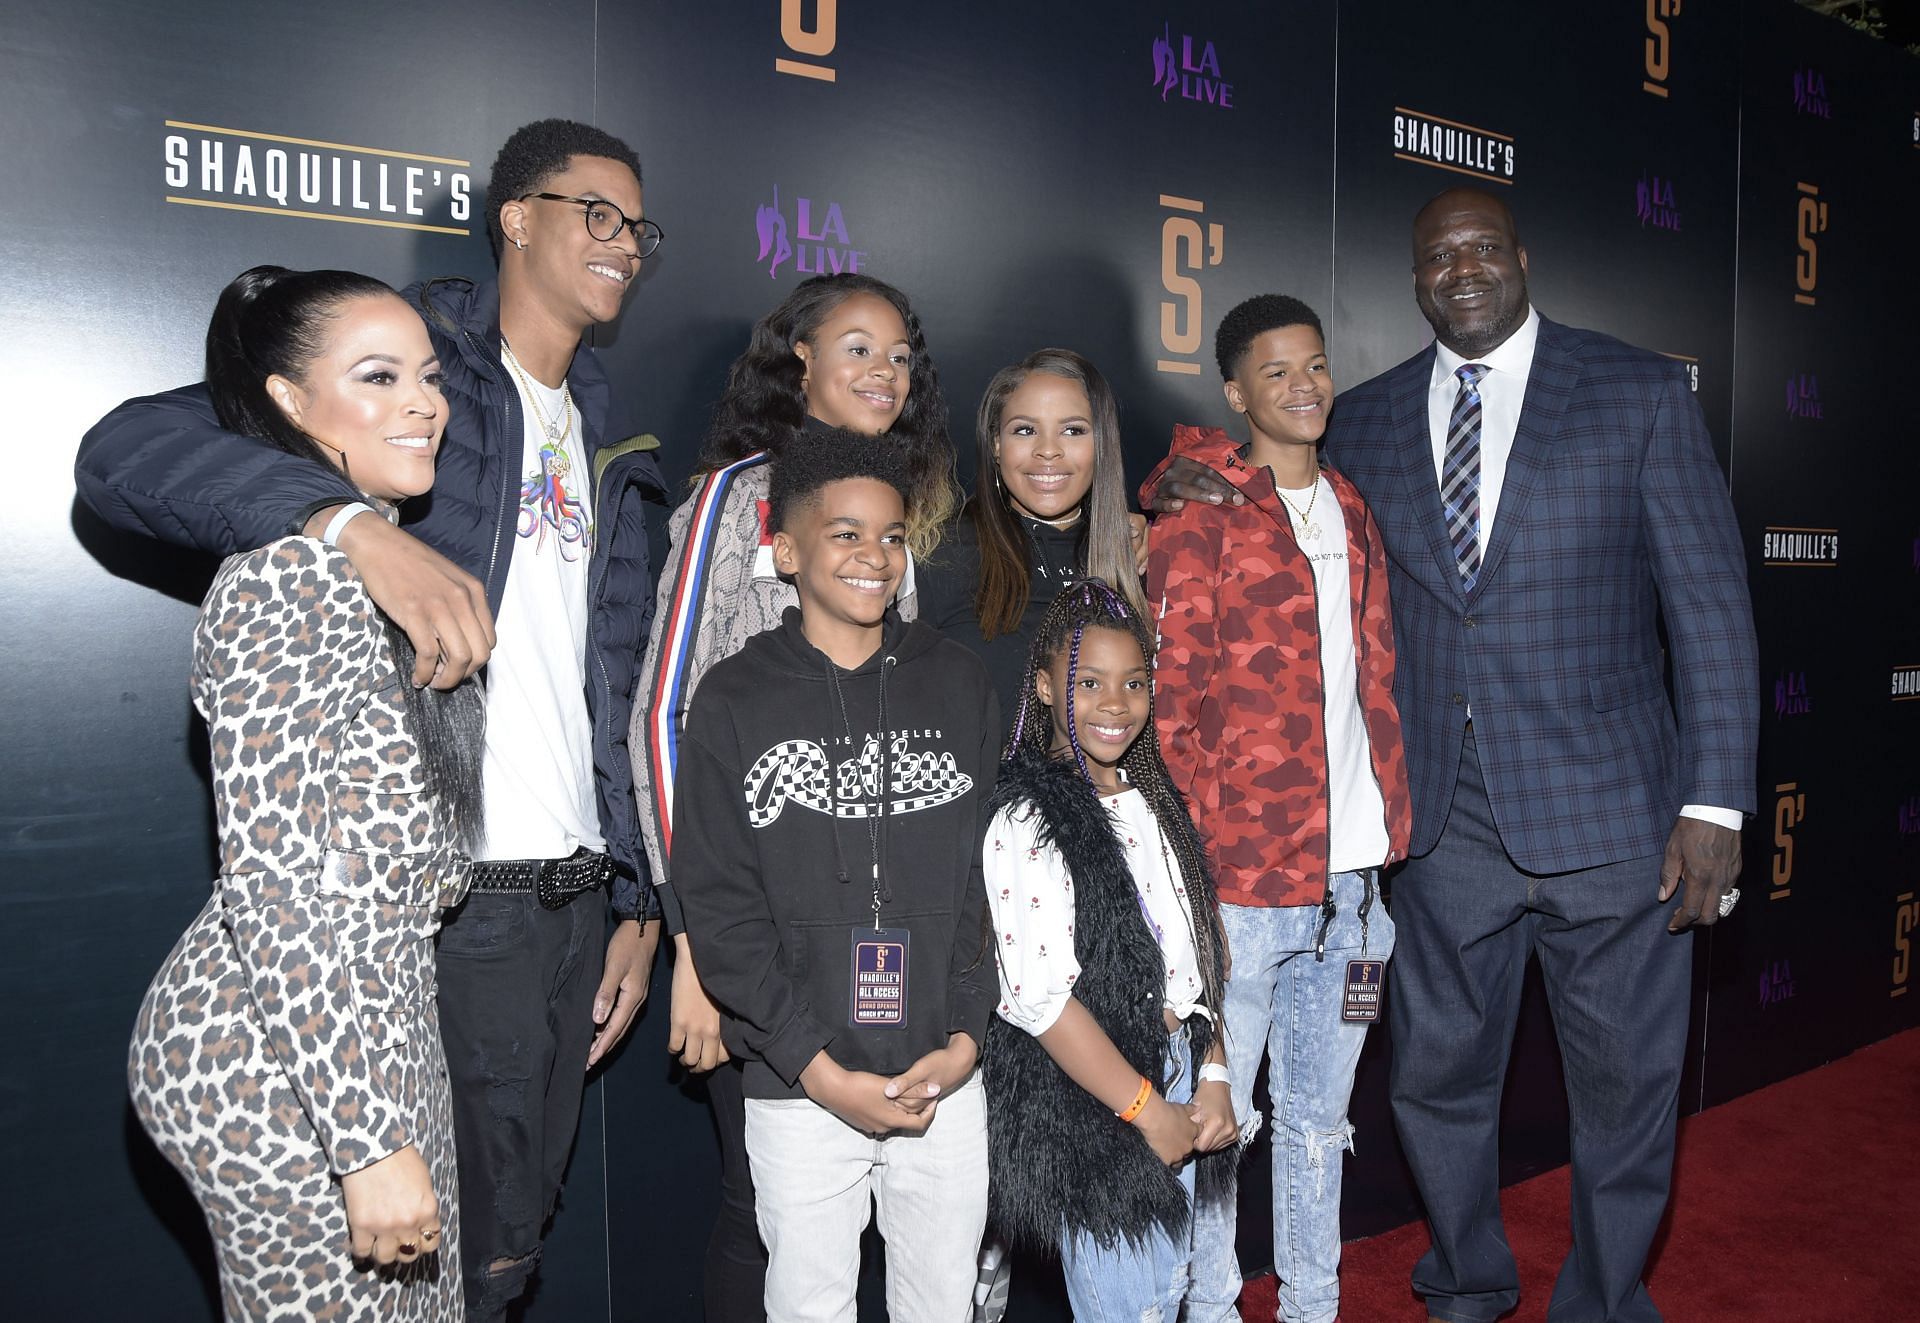 Shaquille O'Neal has three sons and three daughters.